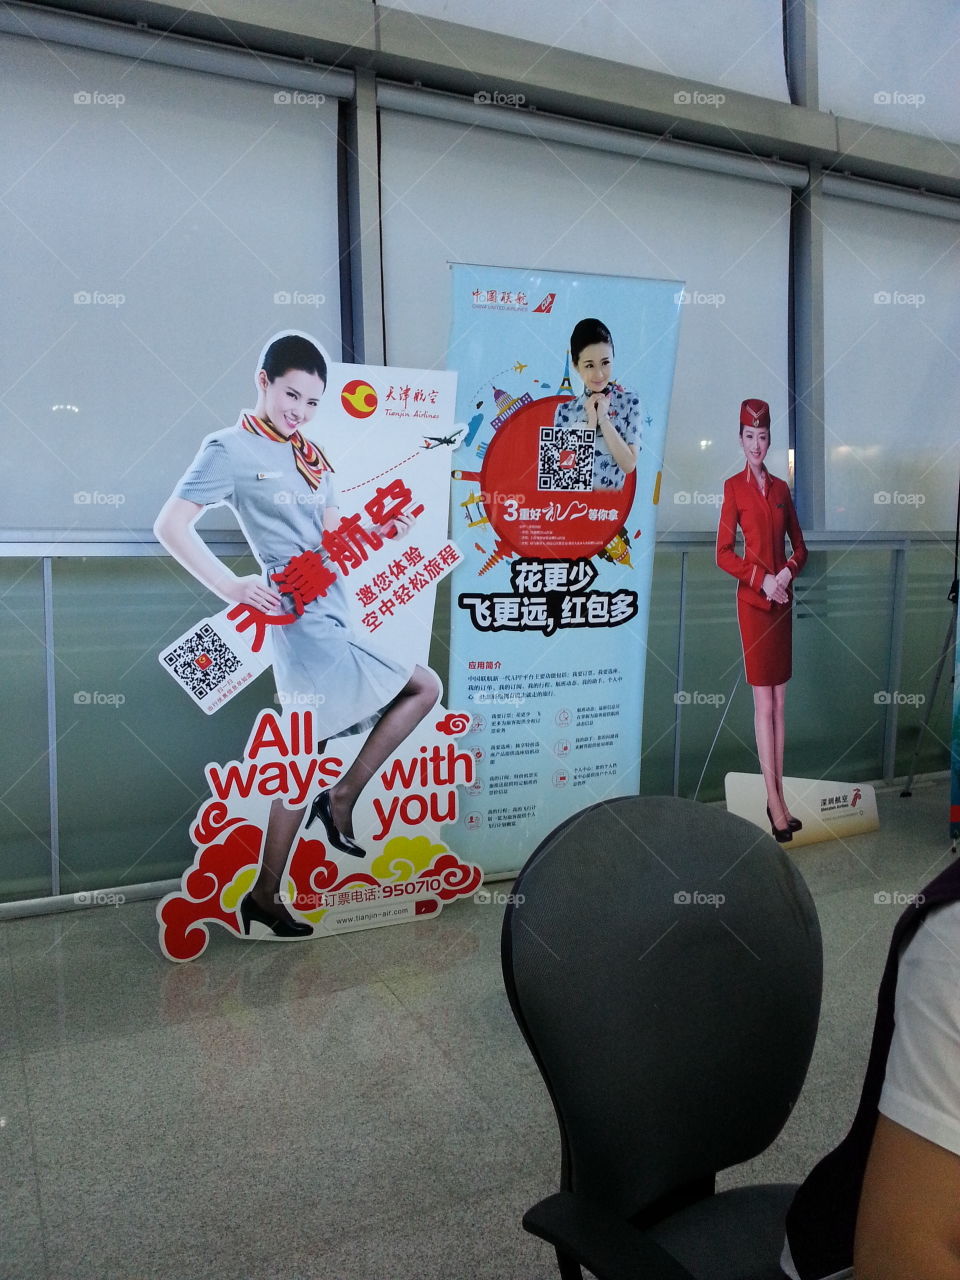 Suggestive cardboard cutout in Chinese airport